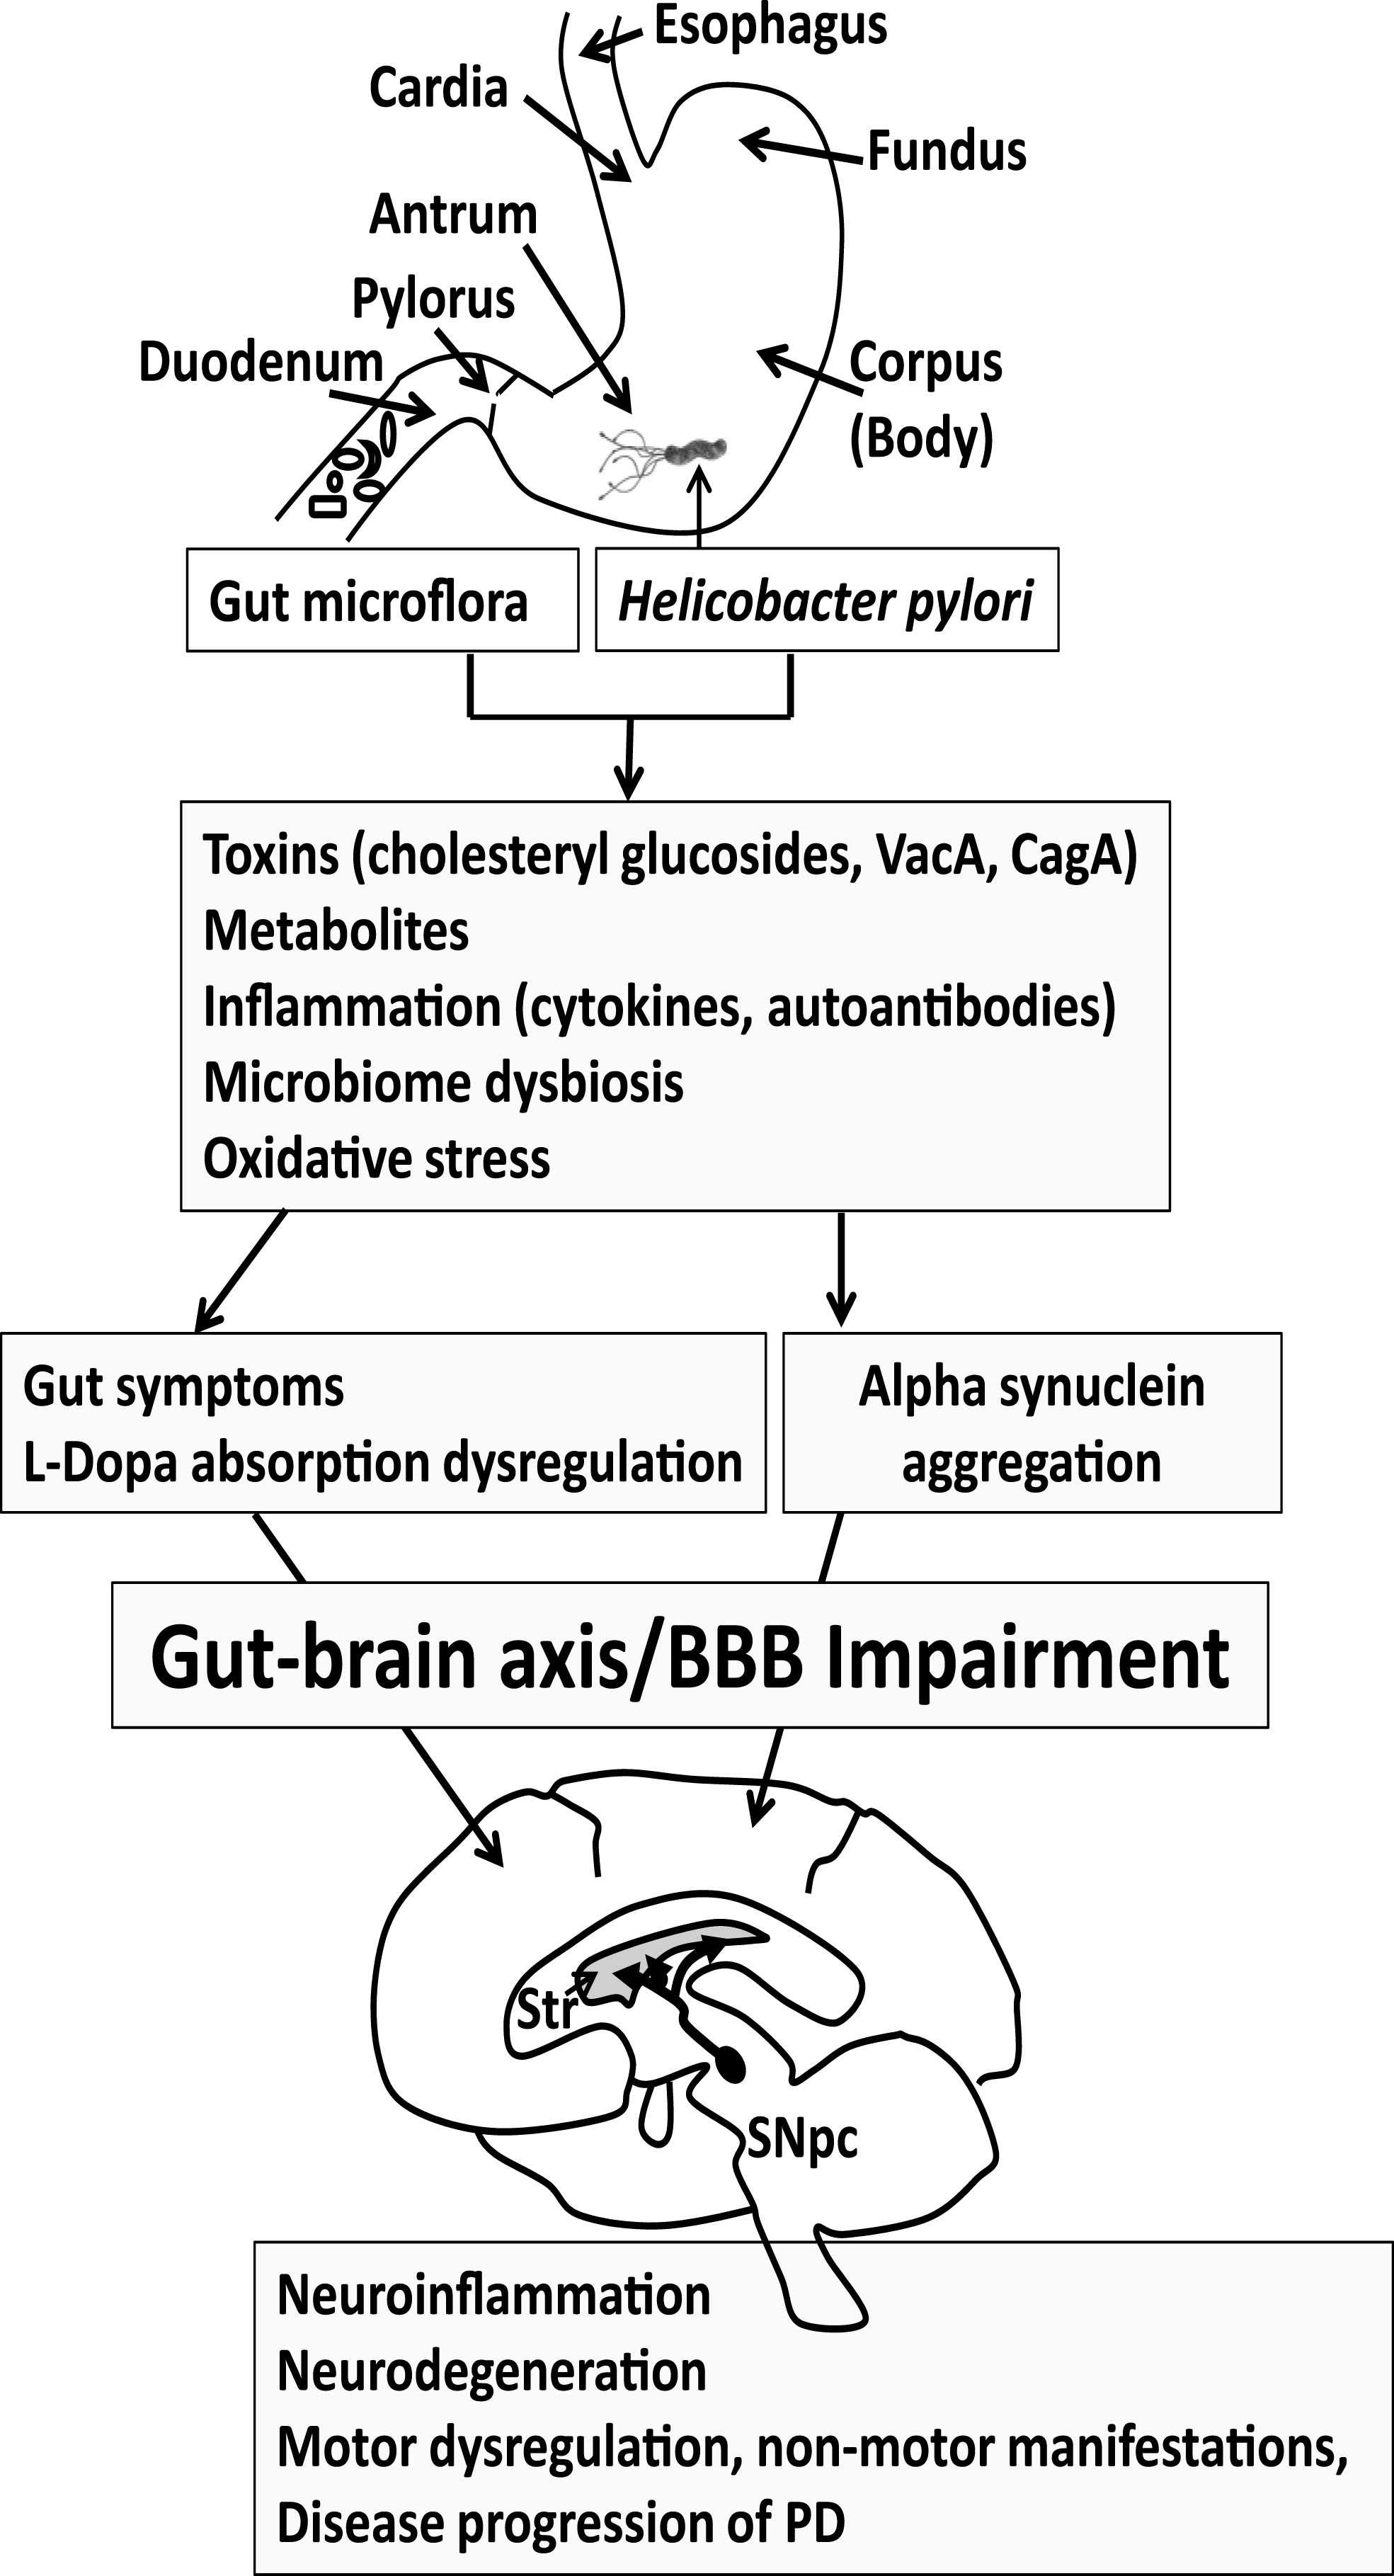 Progression of Parkinson’s disease (PD). Gut microflora and Helicobacter pylori may produce toxins and metabolites and trigger an immune response that features cytokines and autoantibodies. The gut microbiome may become dysregulated. Reactive oxygen species may also contribute to the pathogenesis of PD. Collectively this may lead to GI symptoms and altered L-dopa absorption in PD patients taking L-dopa medication, reducing effectiveness of the medication. The GI symptoms and inflammatory process may become systemic to compromise the BBB, eliciting neuroinflammation in the brain. Alpha synuclein aggregation, which is observed both in the gut and brain, leads to the spreading of neuropathology. The loss of dopaminergic neurons in the substantial nigra pars compacta (SNpc) manifests as motor symptoms observed in PD patients. Thus, eradication of H. pylori or return of the gut microflora to the proper balance may ameliorate gut symptoms, L-dopa absorption and motor functions in PD patients, which could delay PD disease progression. Str, Striatum.